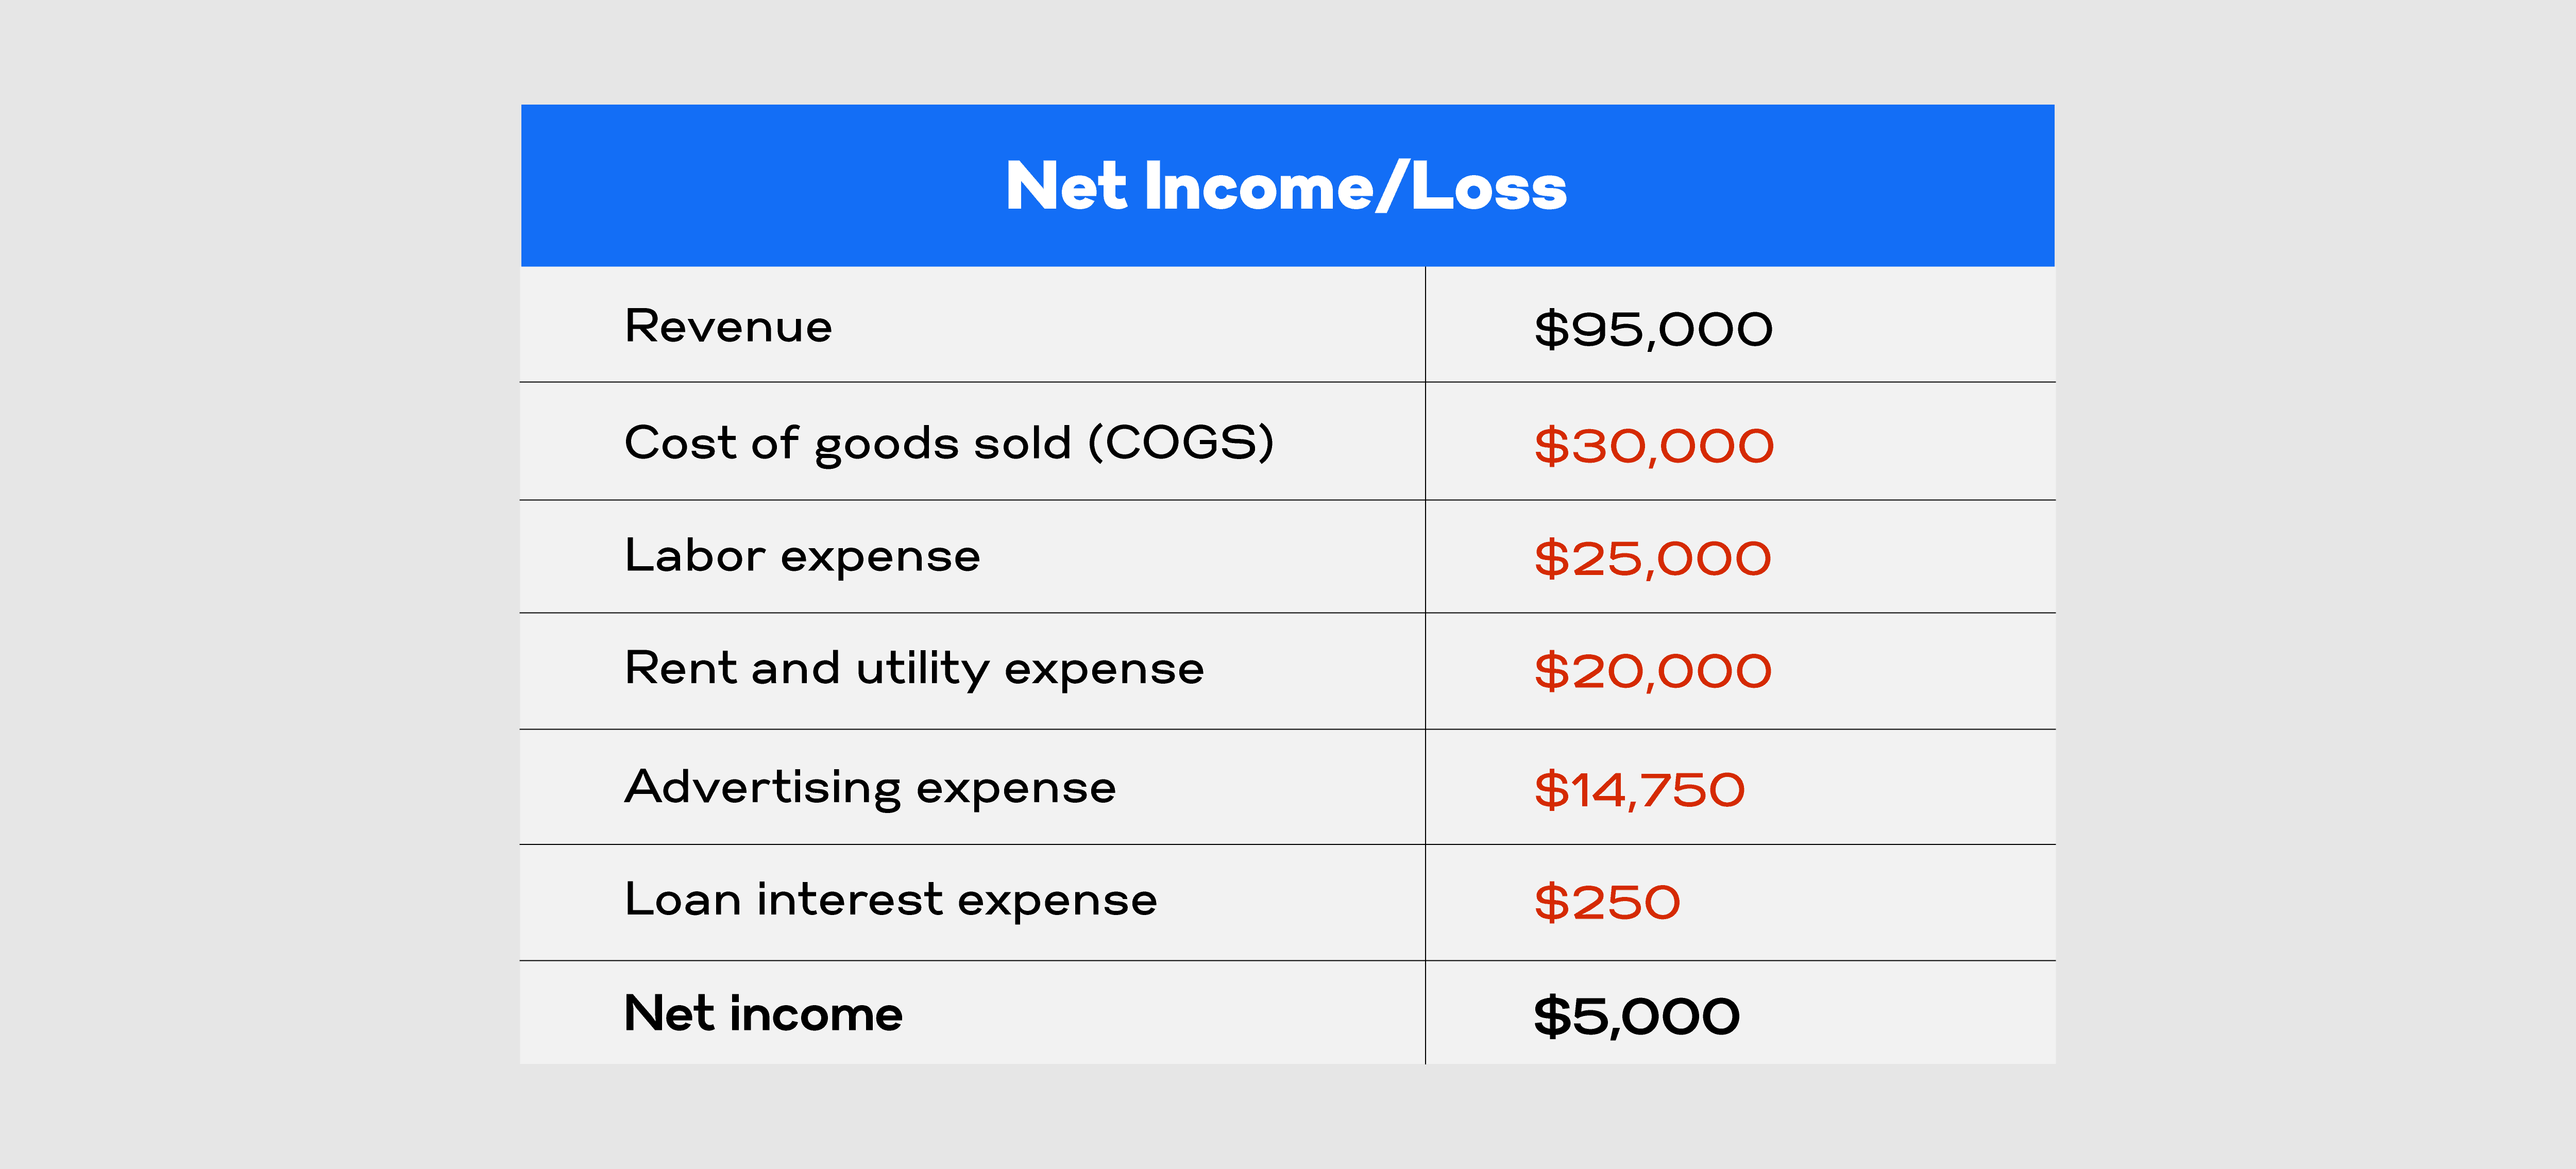 restaurant_balance_sheet_net_income_loss_example_f87a918b1f.png